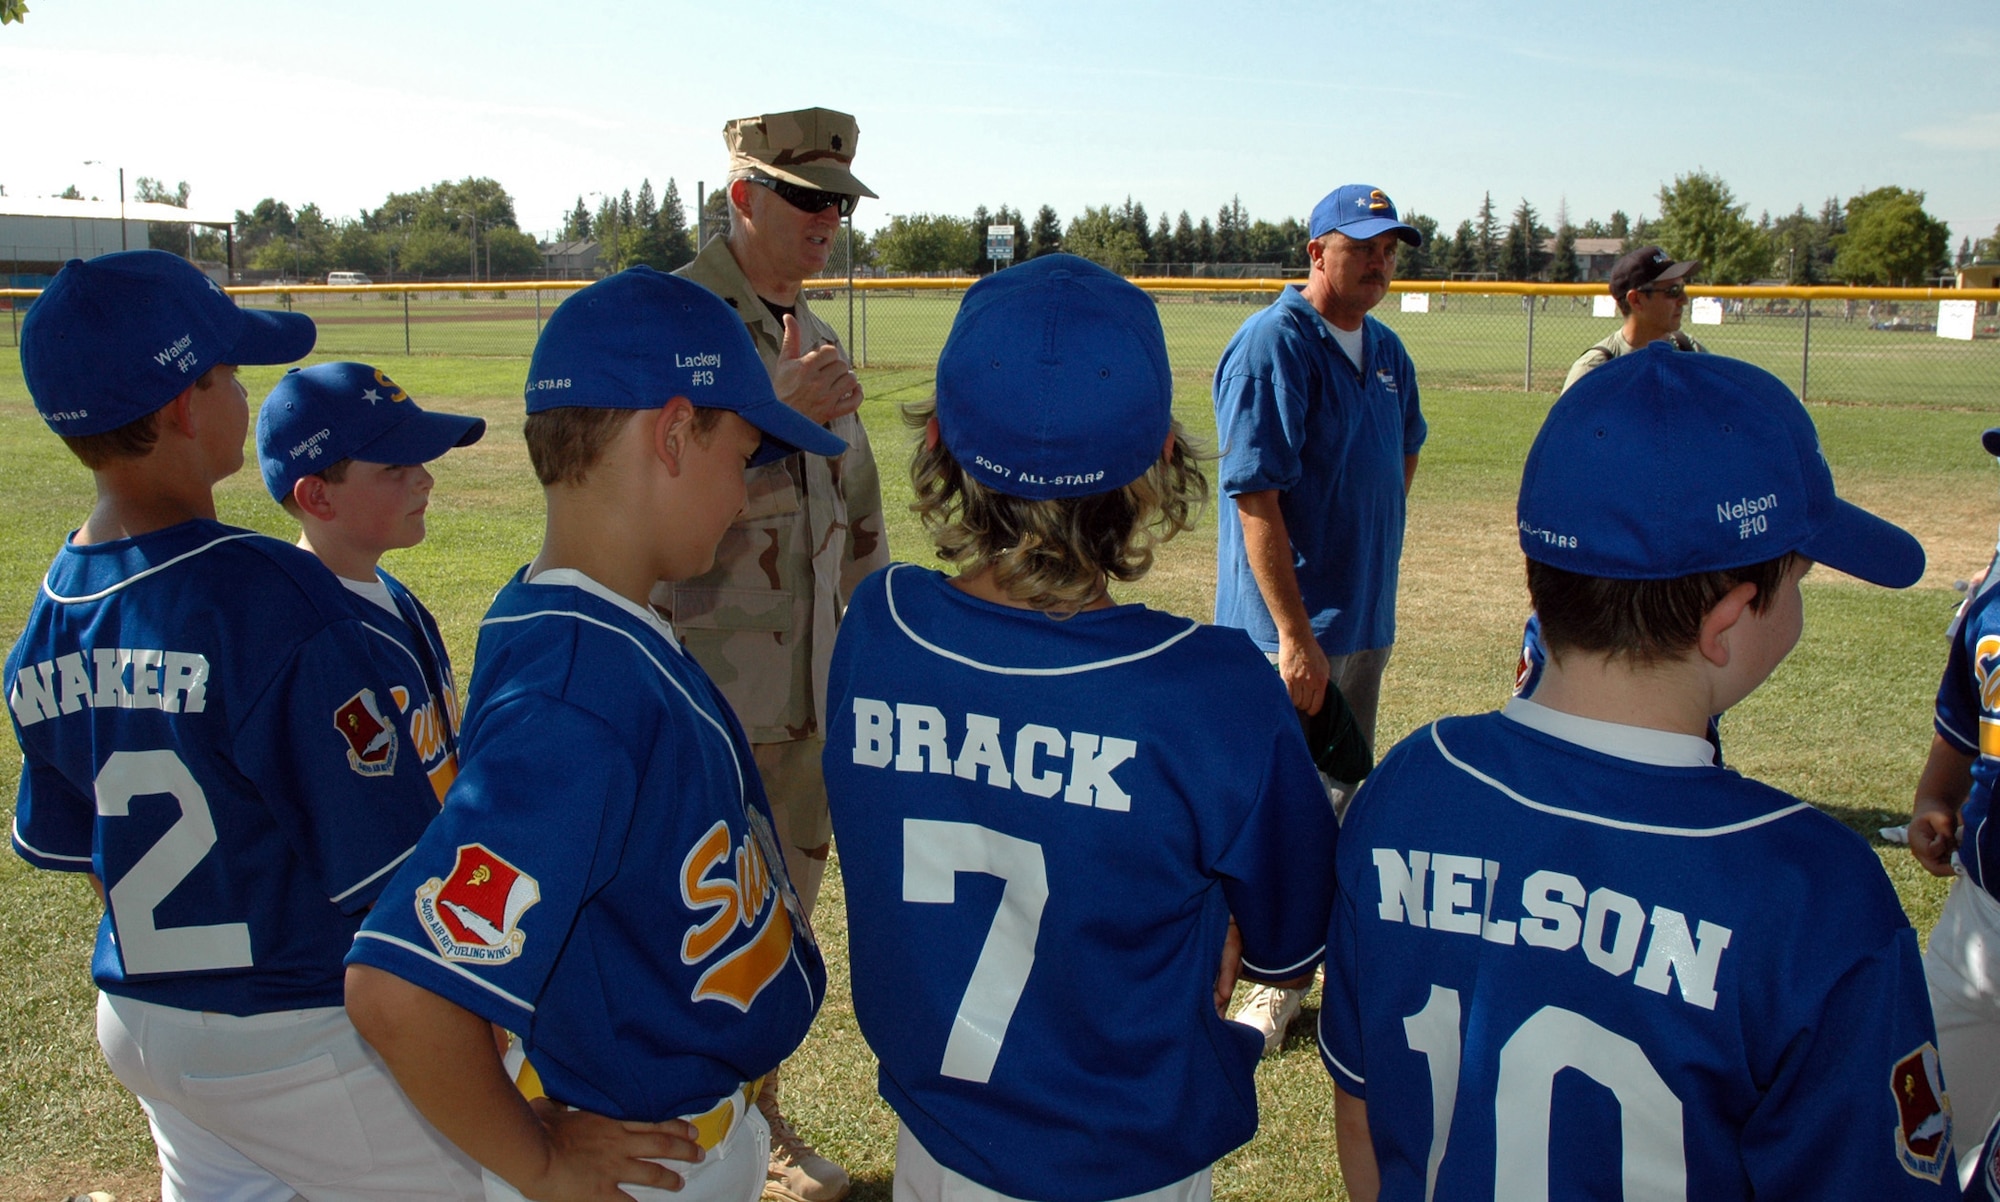 Lt. Col. Tim McCoy, 940th Mission Support Group commander, visits with the Sunrise Little League all-star team. The team is wearing the patch of the 940th Air Refueling Wing, Beale AFB, Calif., on the sleeves of their uniforms to honor their military heroes. Lt.Col McCoy thanked the team and cheered them on to their first victory. The wing has 26 Reservists deployed in support of the Global War on Terror. (U S Air Force photo/Master Sgt. Ellen L Hatfield